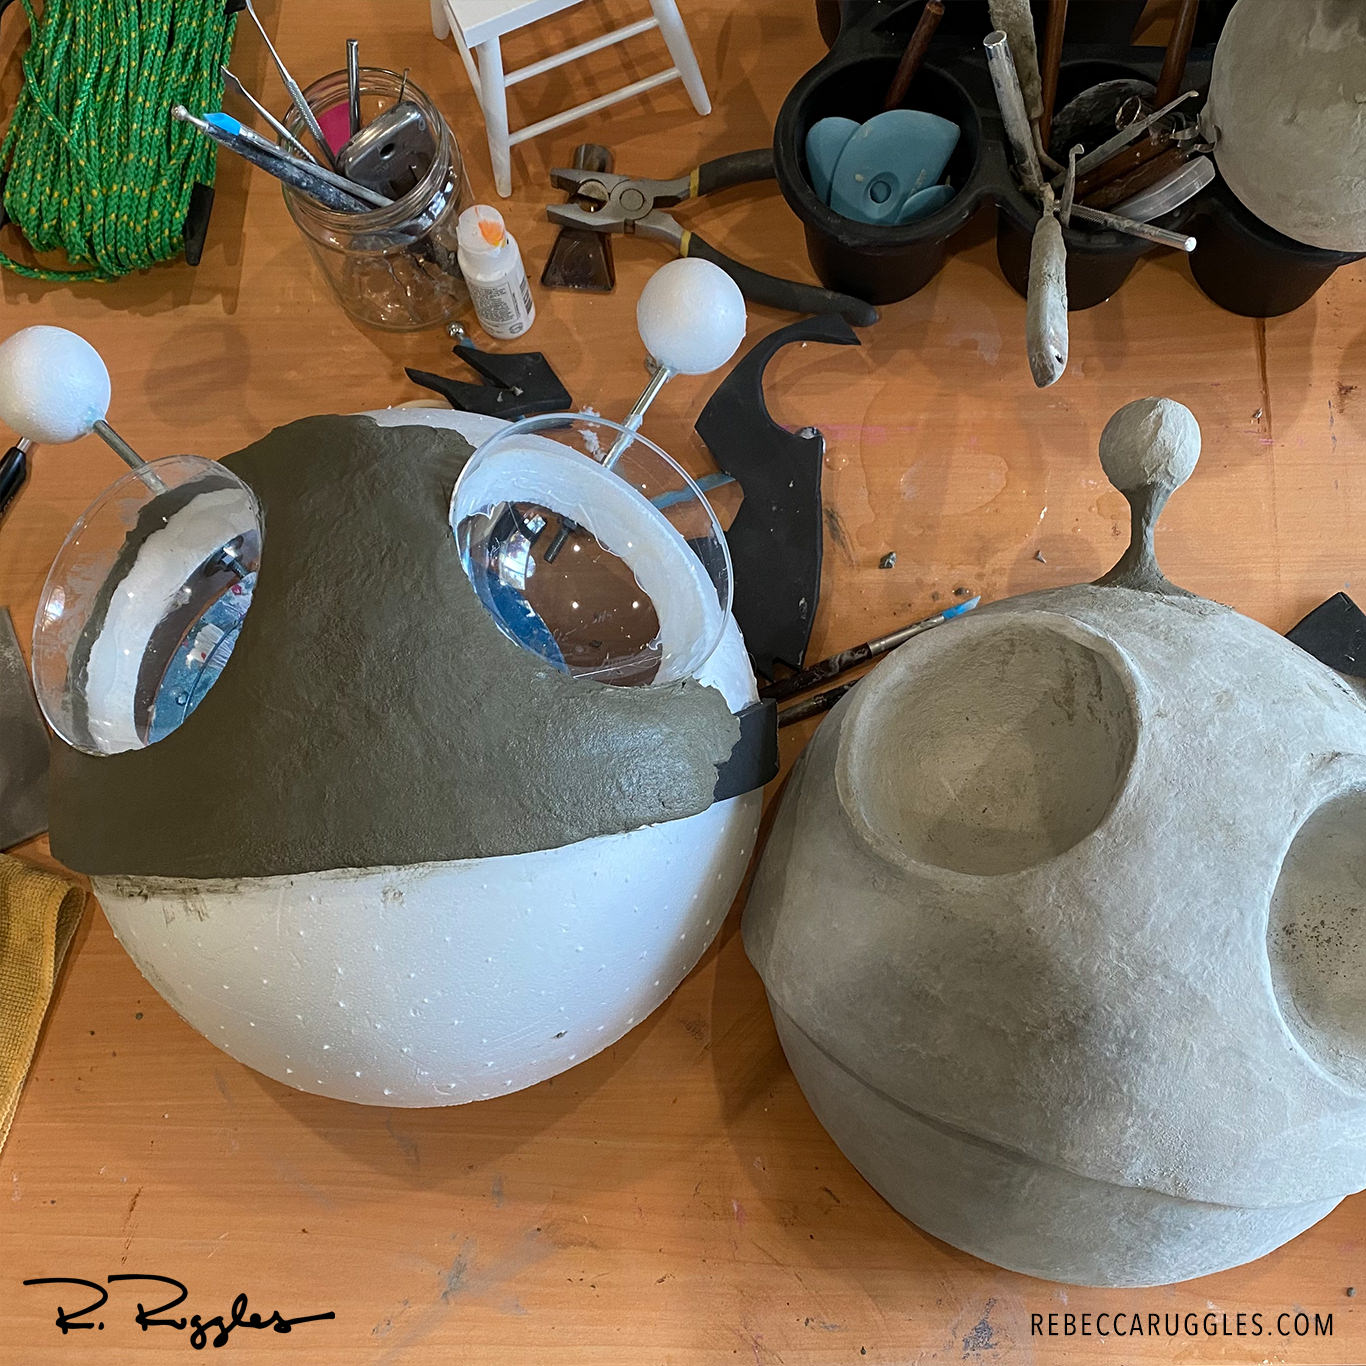 Second the third alien heads being working on by artist and sculptor Rebecca Ruggles.